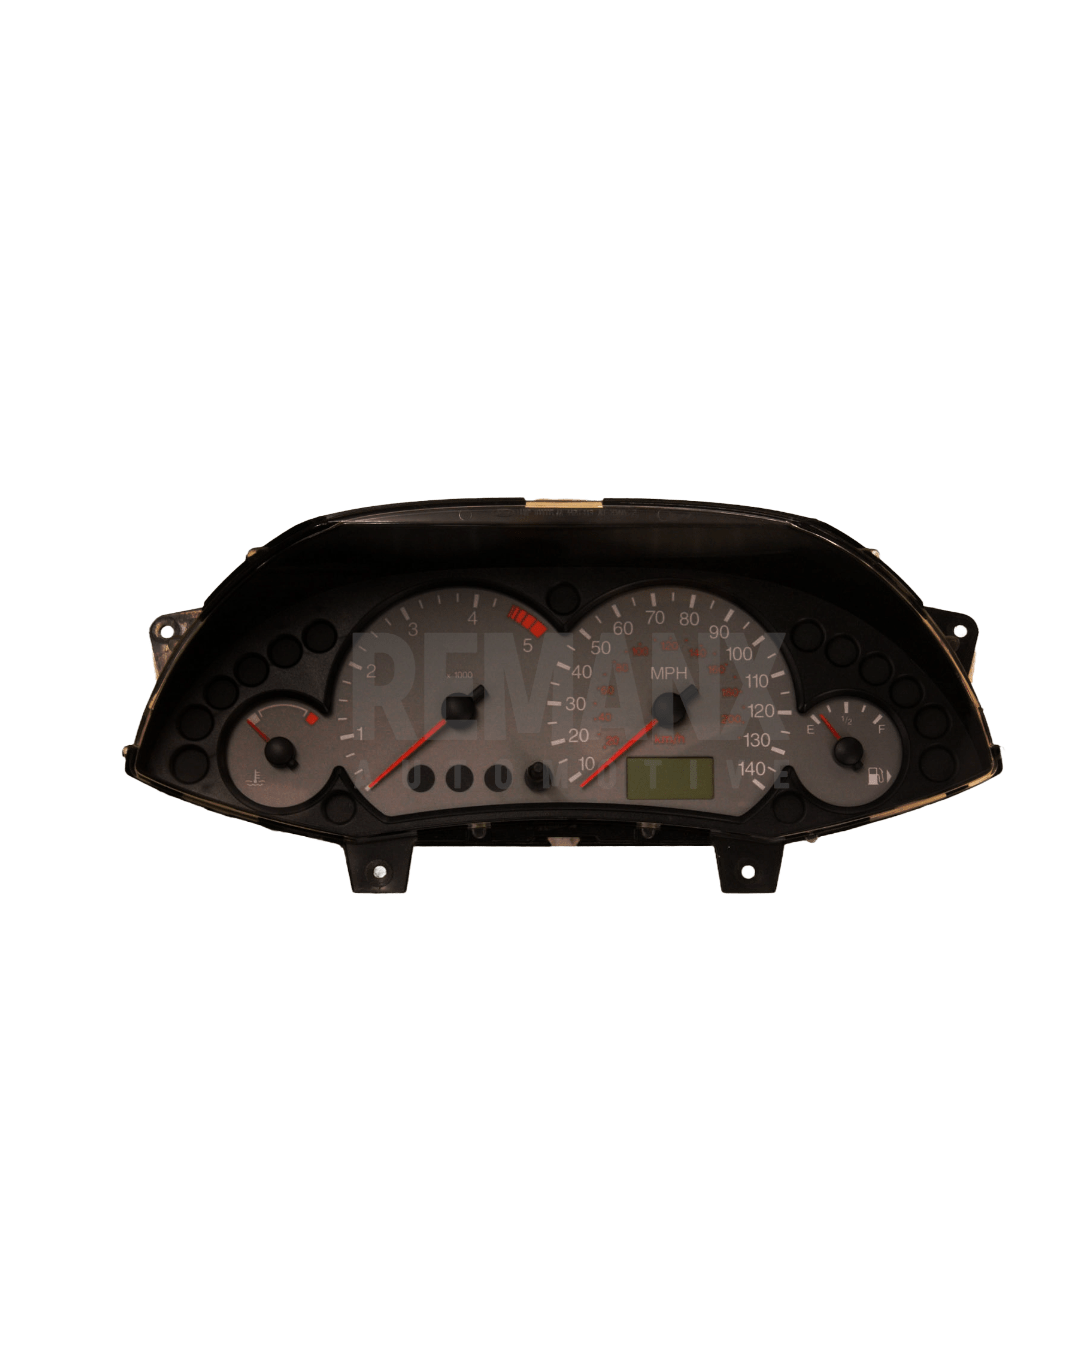 Ford Focus Mk I Instrument cluster from Remanx